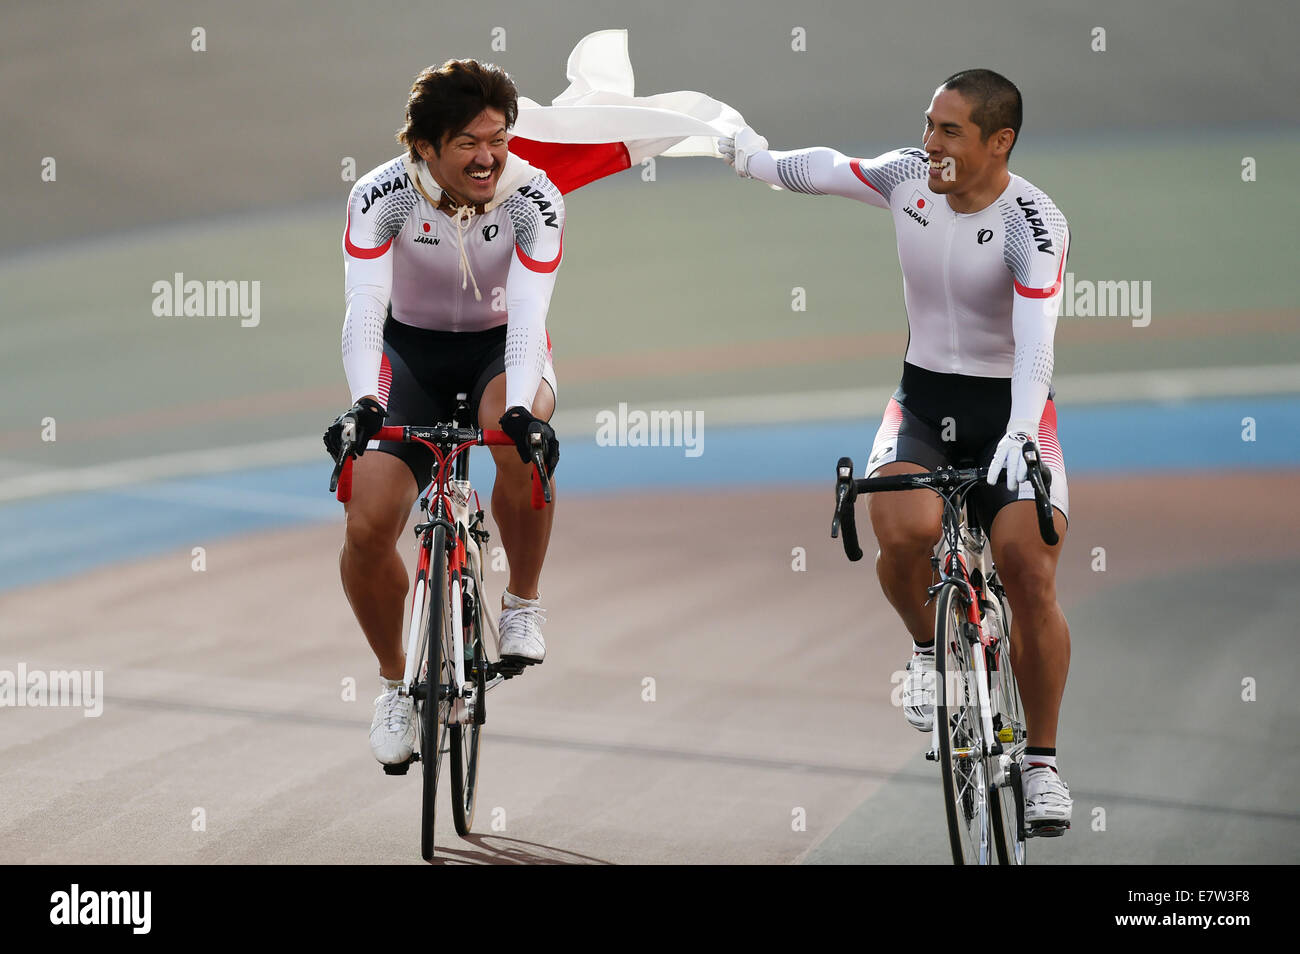 Incheon, South Korea. 24th Sep, 2014. Nakagawa Seiichiro (L) and Kawabata Tomoyuki of Japan celebrate victory after the men's sprint finals of cycling track competition at the 17th Asian Games in Incheon, South Korea, Sept. 24, 2014. Nakagawa Seiichiro and Kawabata Tomoyuki won the gold and silver medal respectively. Credit:  Huang Zongzhi/Xinhua/Alamy Live News Stock Photo